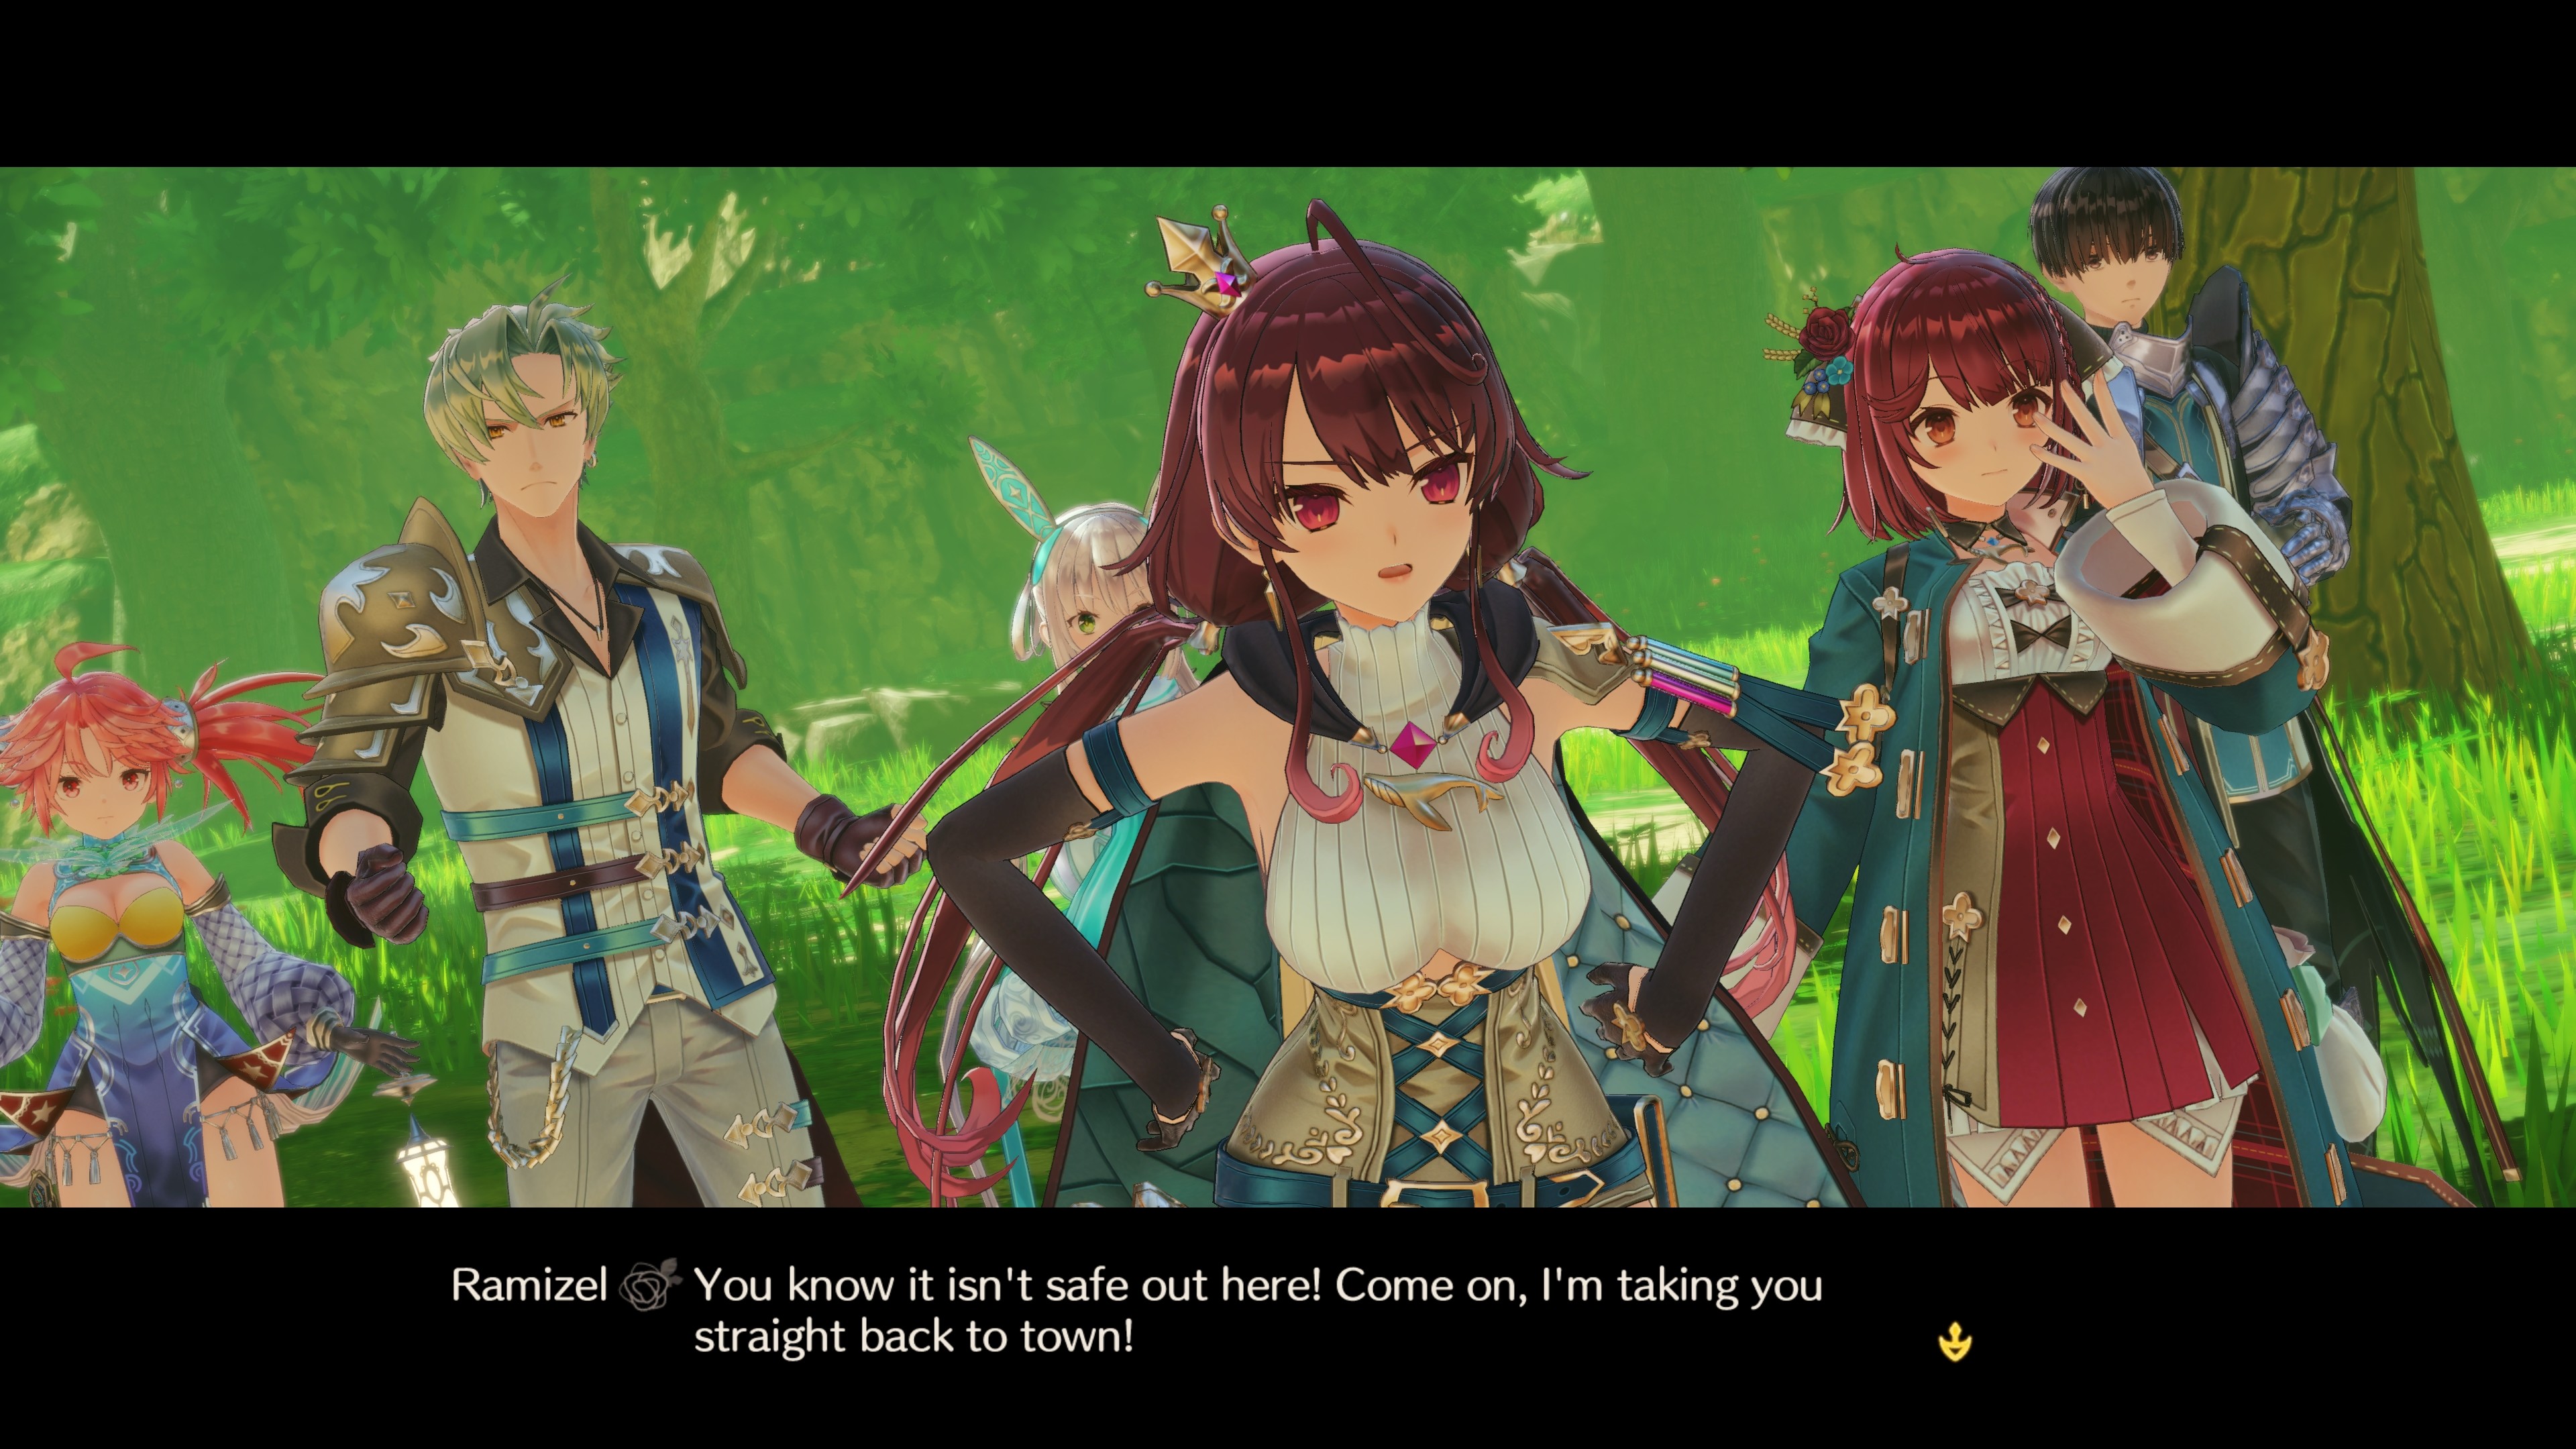 Atelier Sophie 2: The Alchemist of the Mysterious Dream Free Download for PC